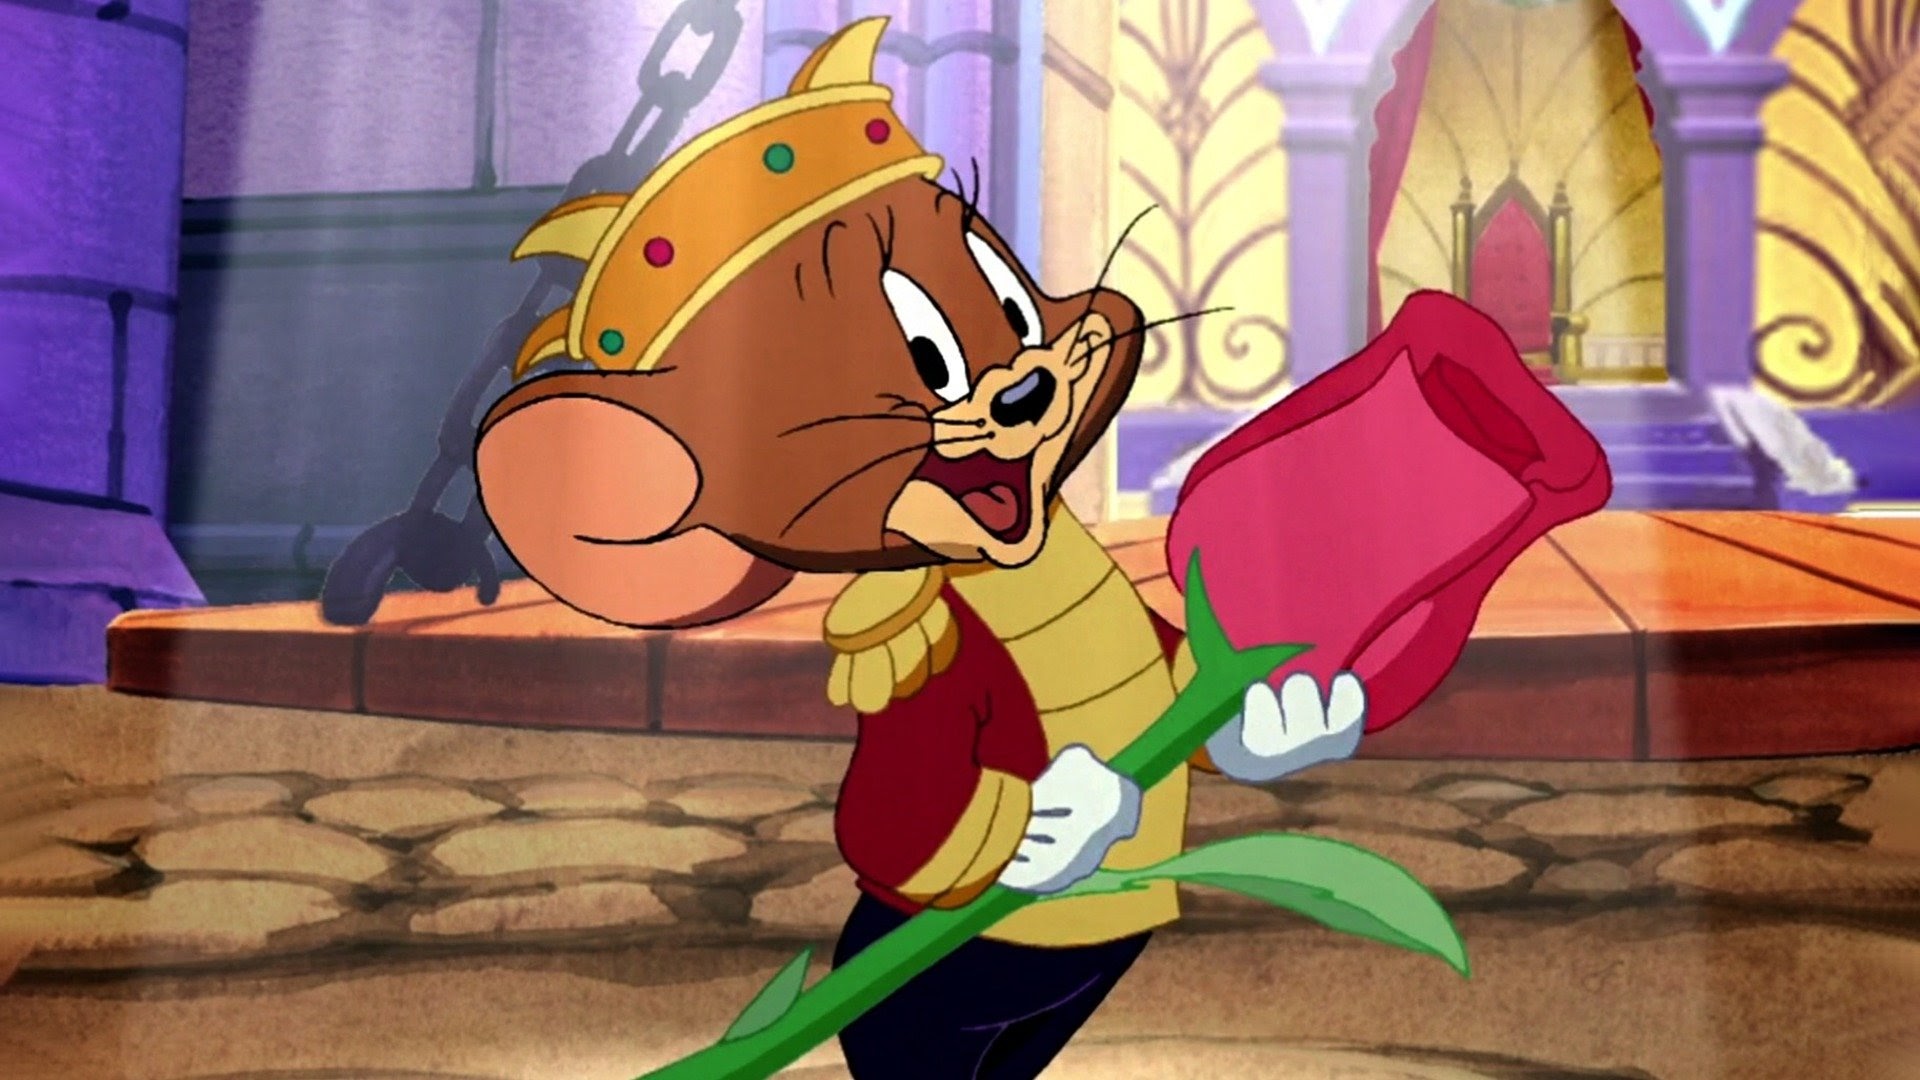 Tom and Jerry: A Nutcracker Tale - Movies on Google Play